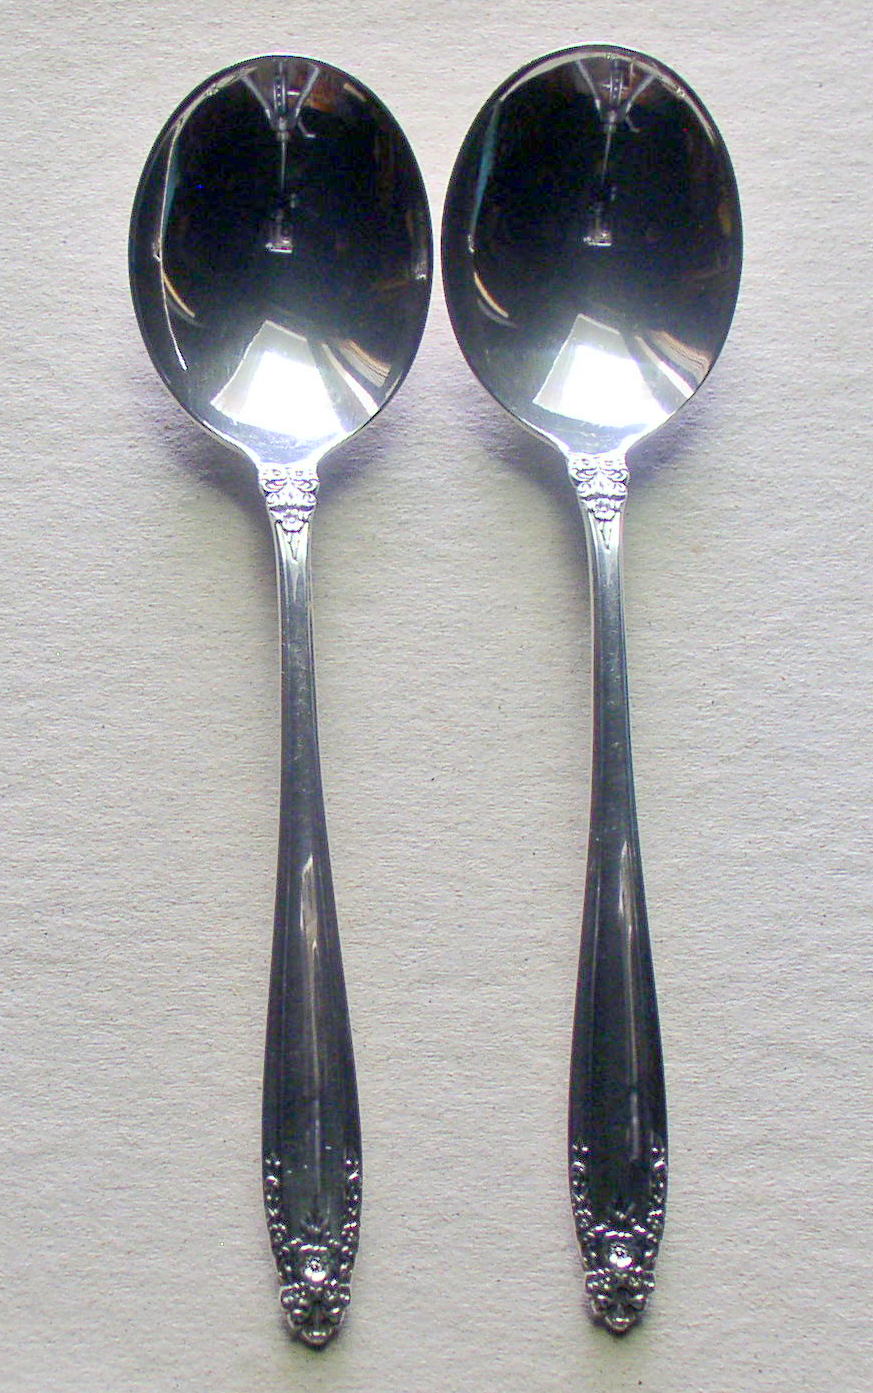 International Silver Co "Prelude" Round Bowl Soup Spoon 